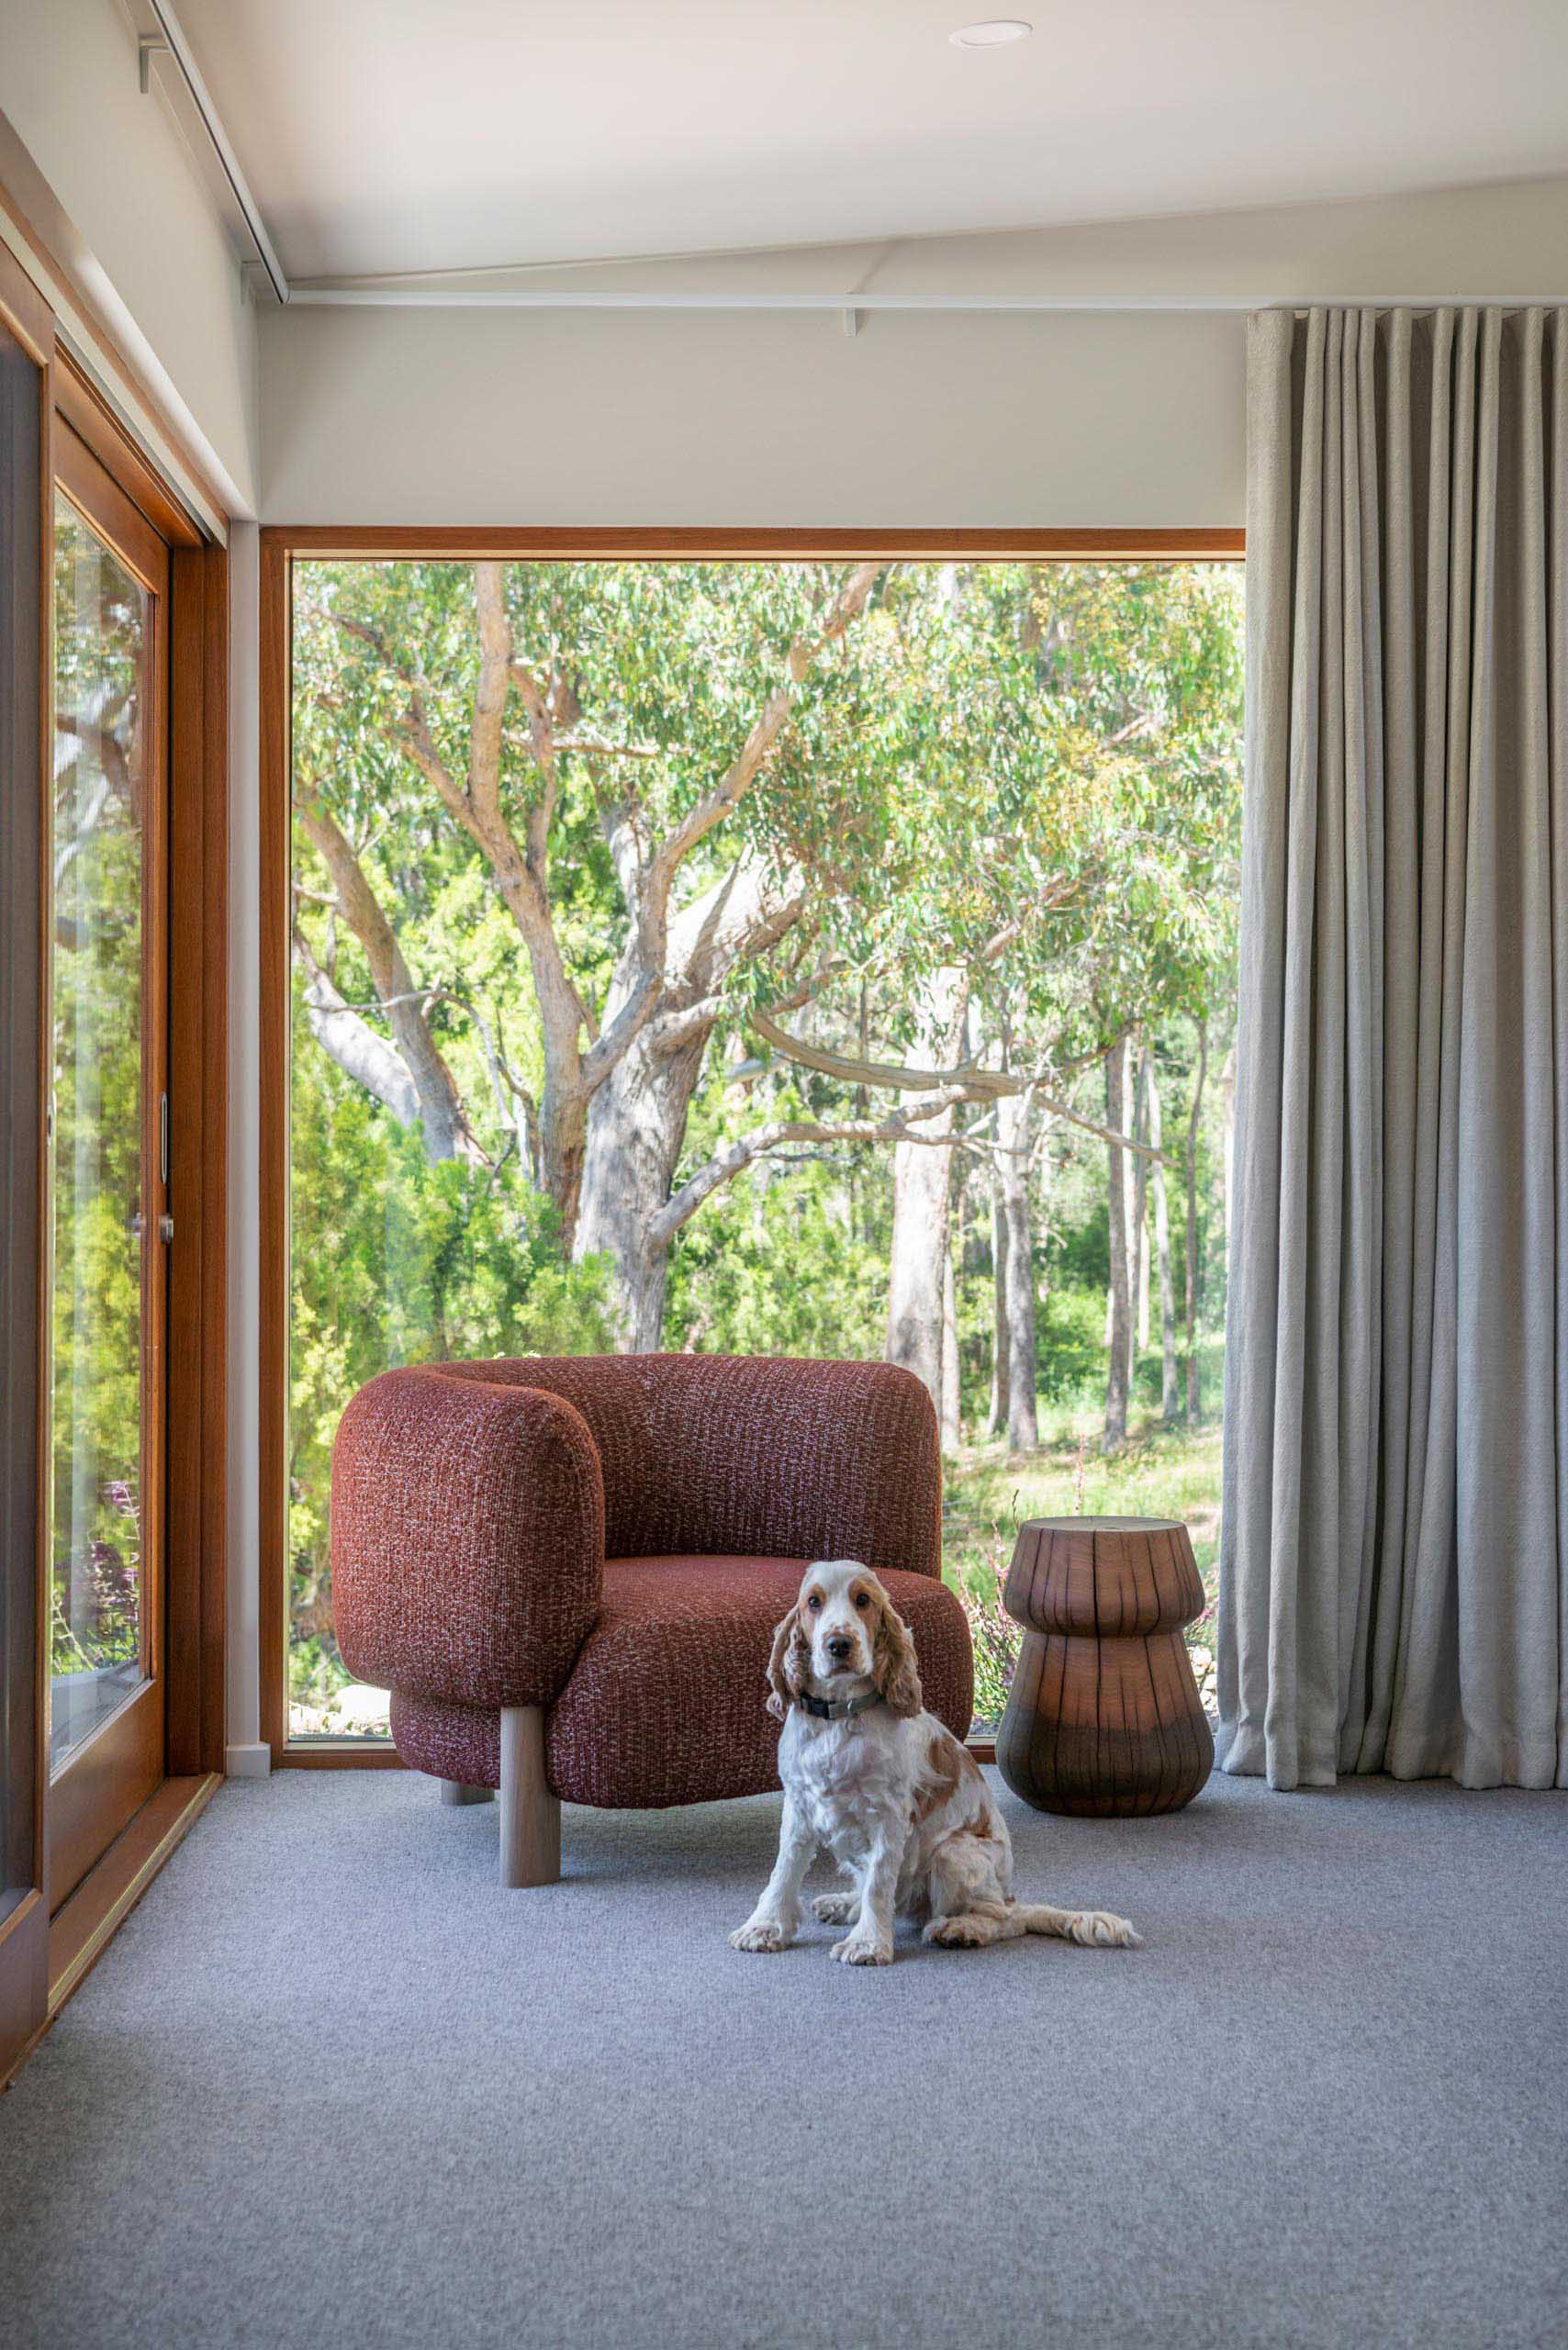 Large windows and a sliding door provide an uninterrupted tree view in a modern bedroom.